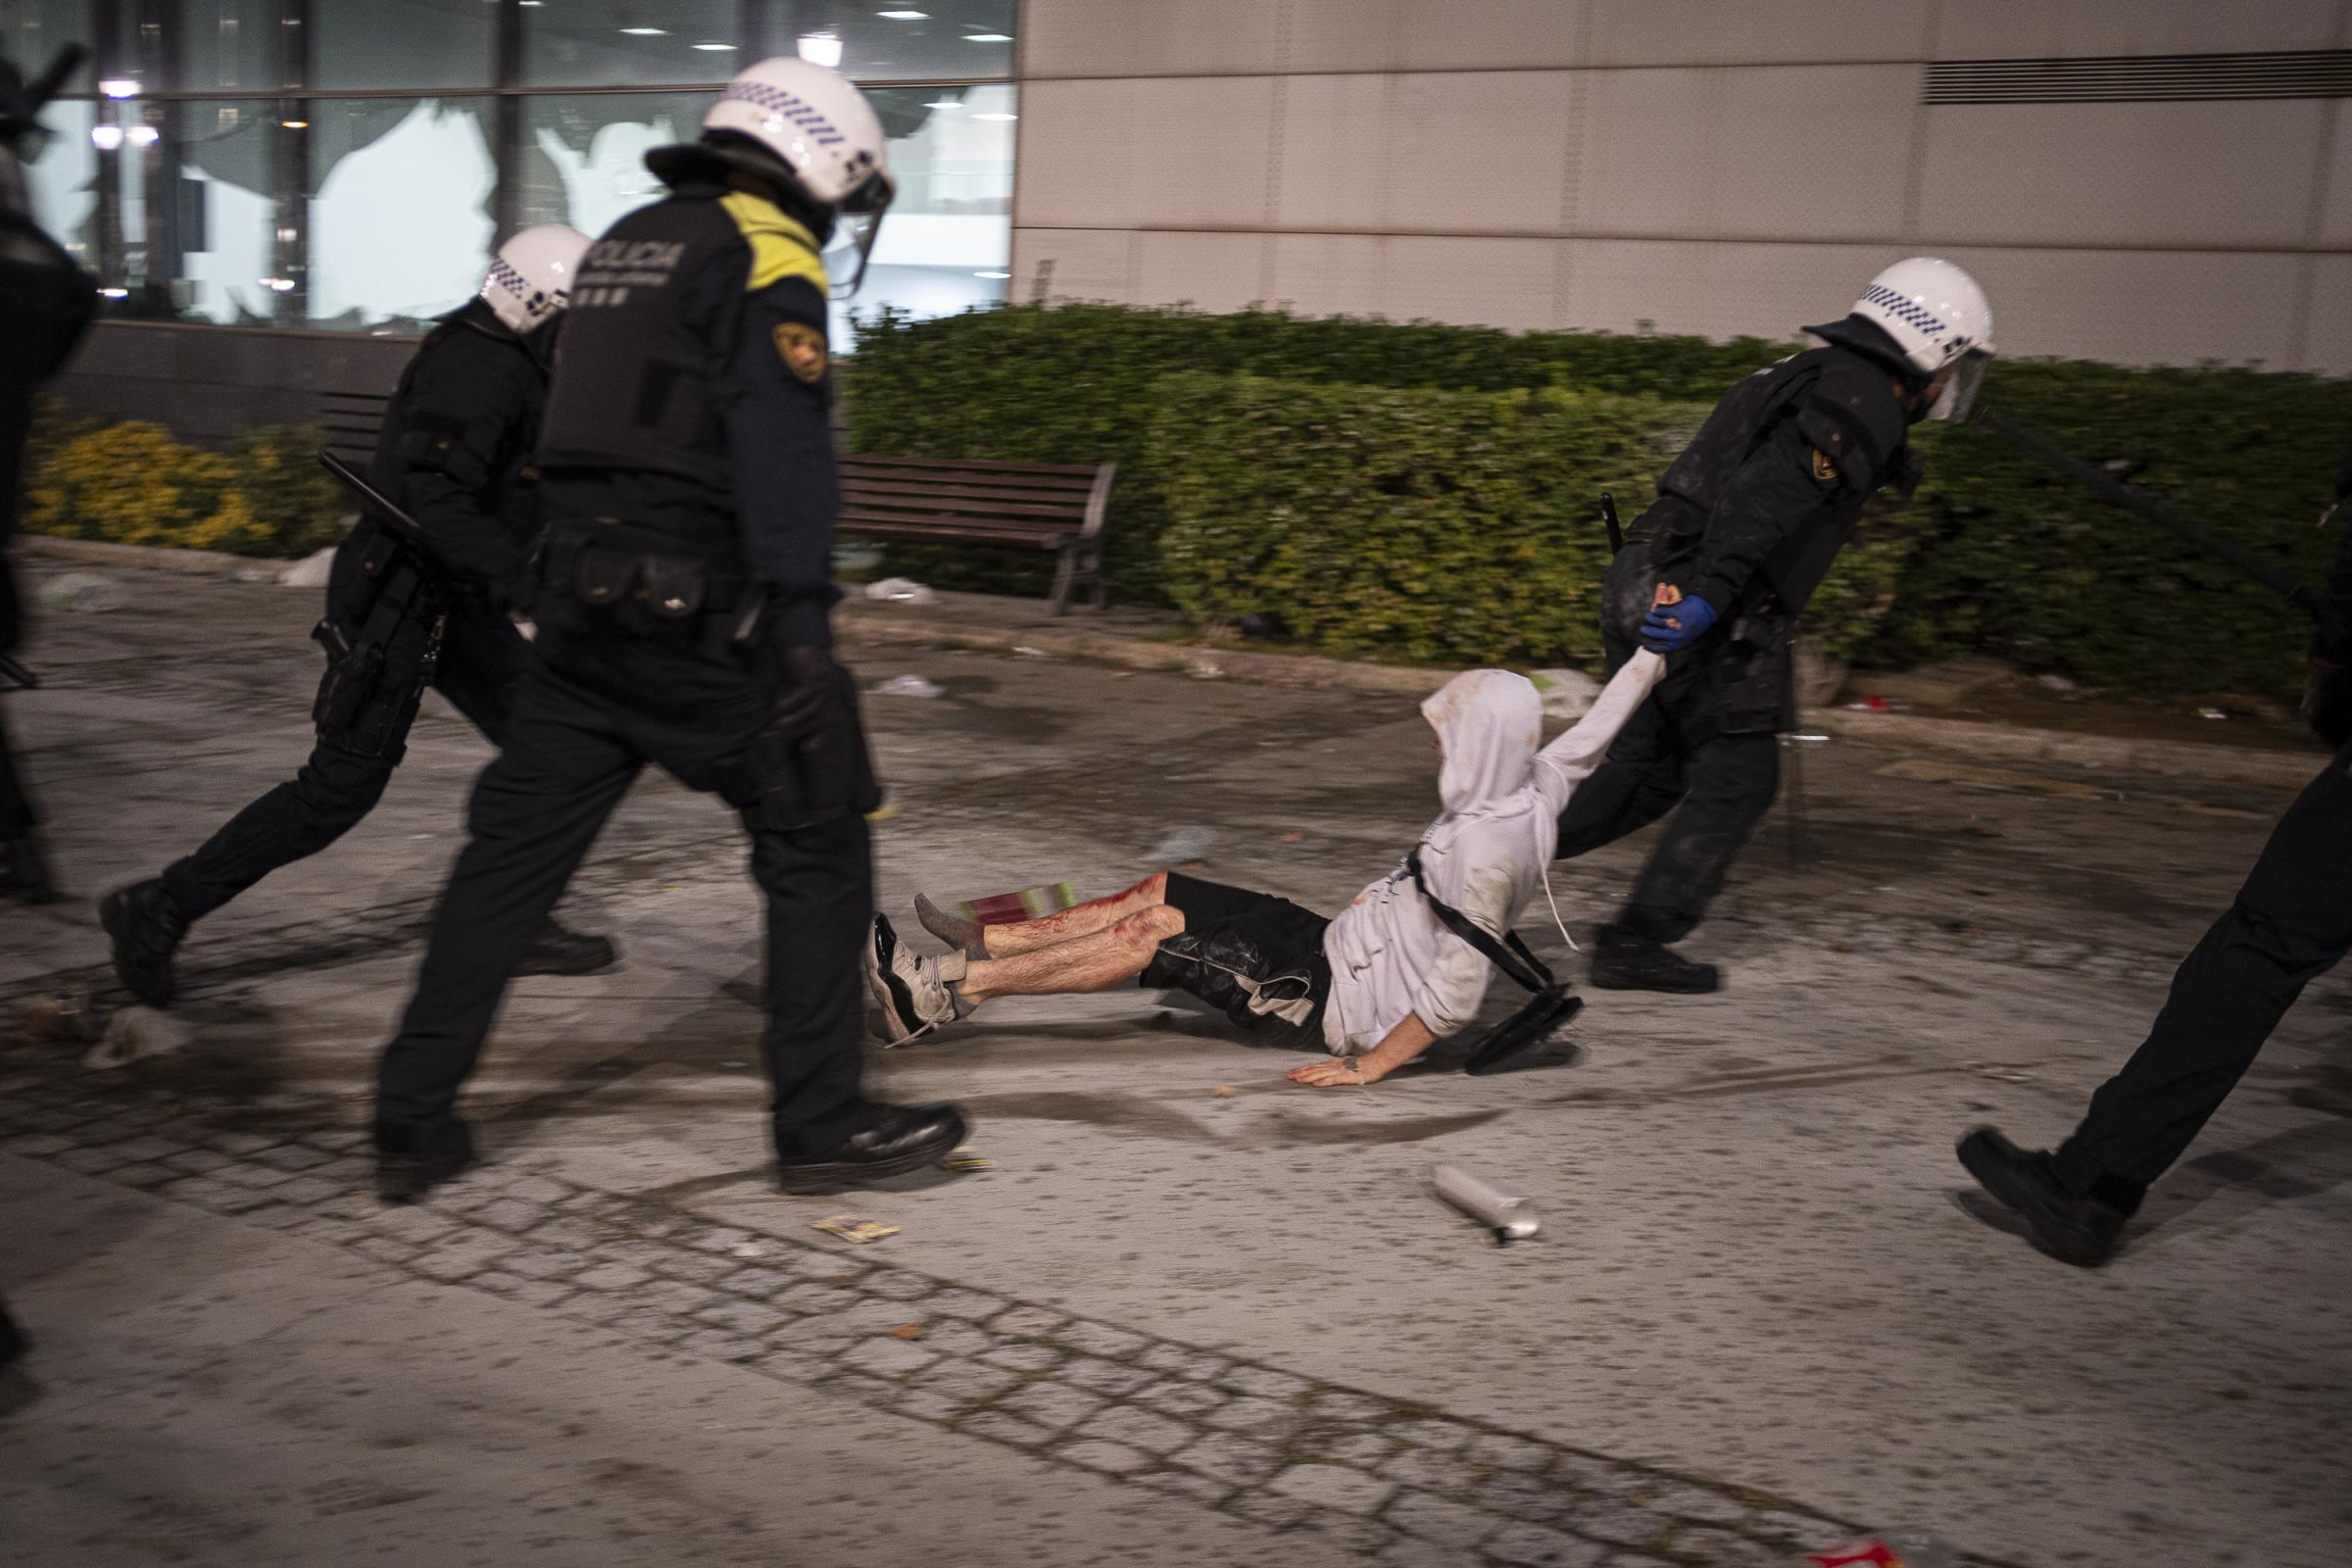 A young man, his legs bloodied, is dragged by a Guardia Urbana anti-riot police officer into the...